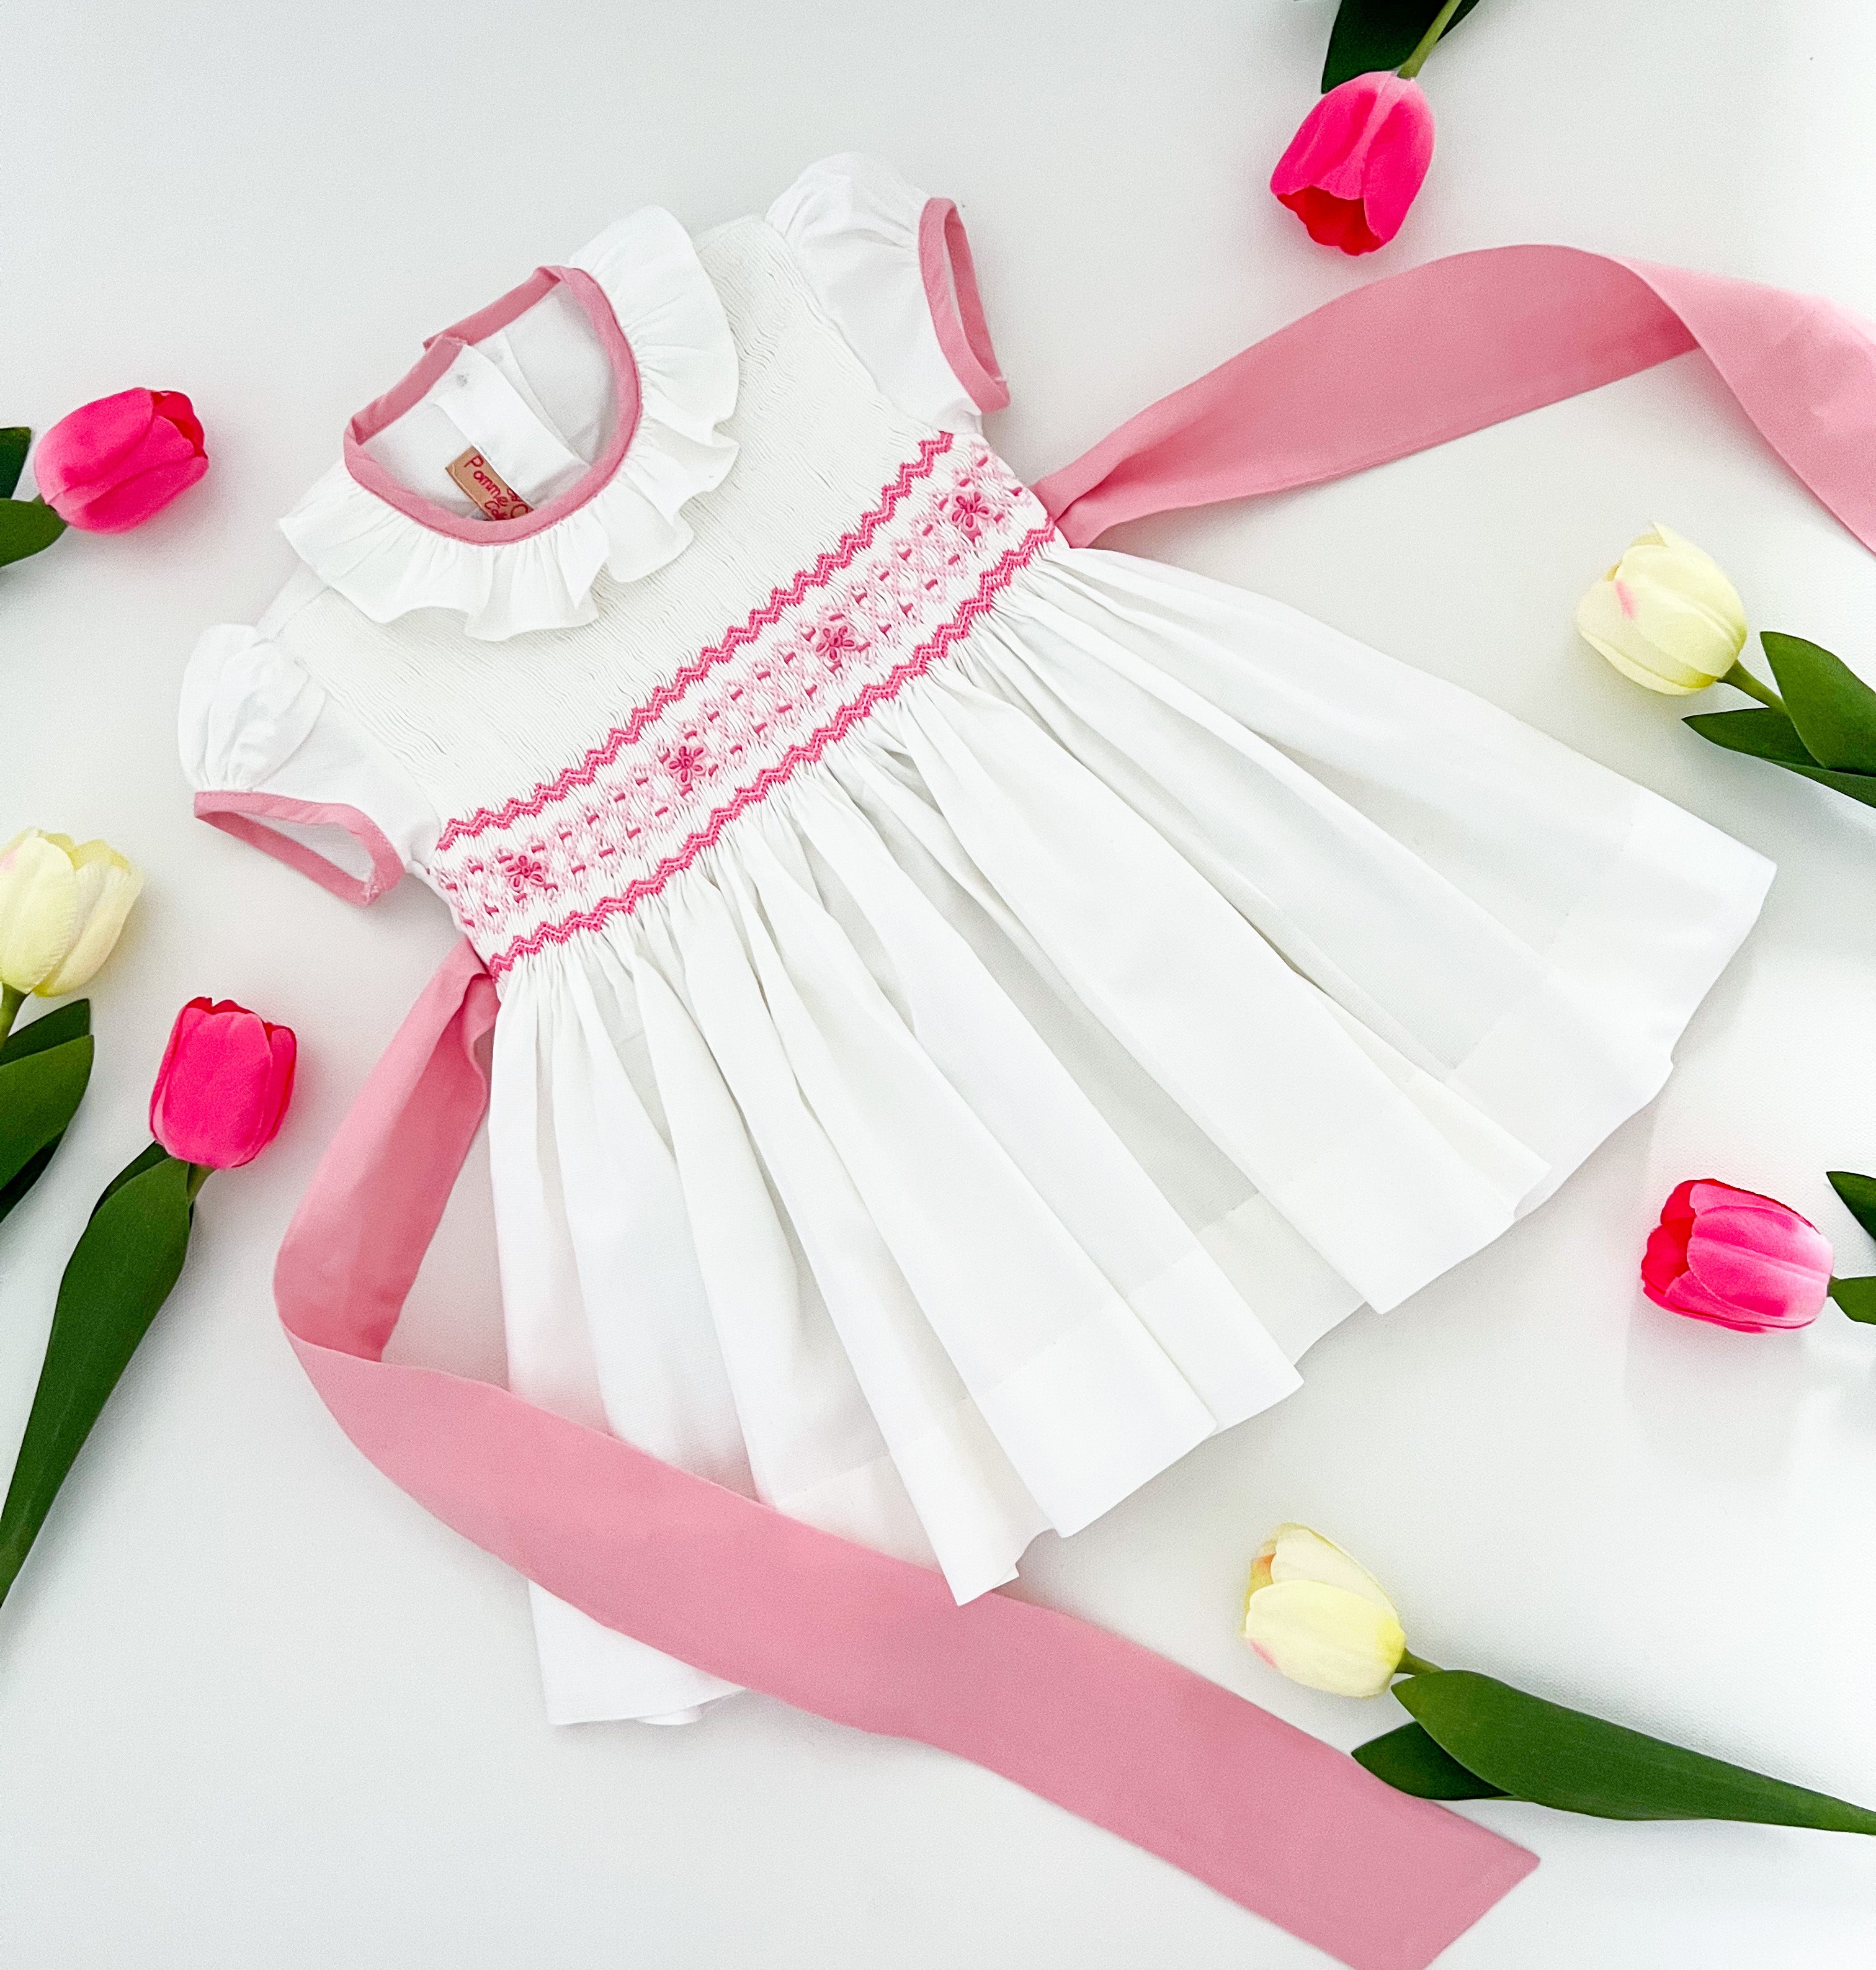 The hand smocked BENEDICTE dress - in white and pink